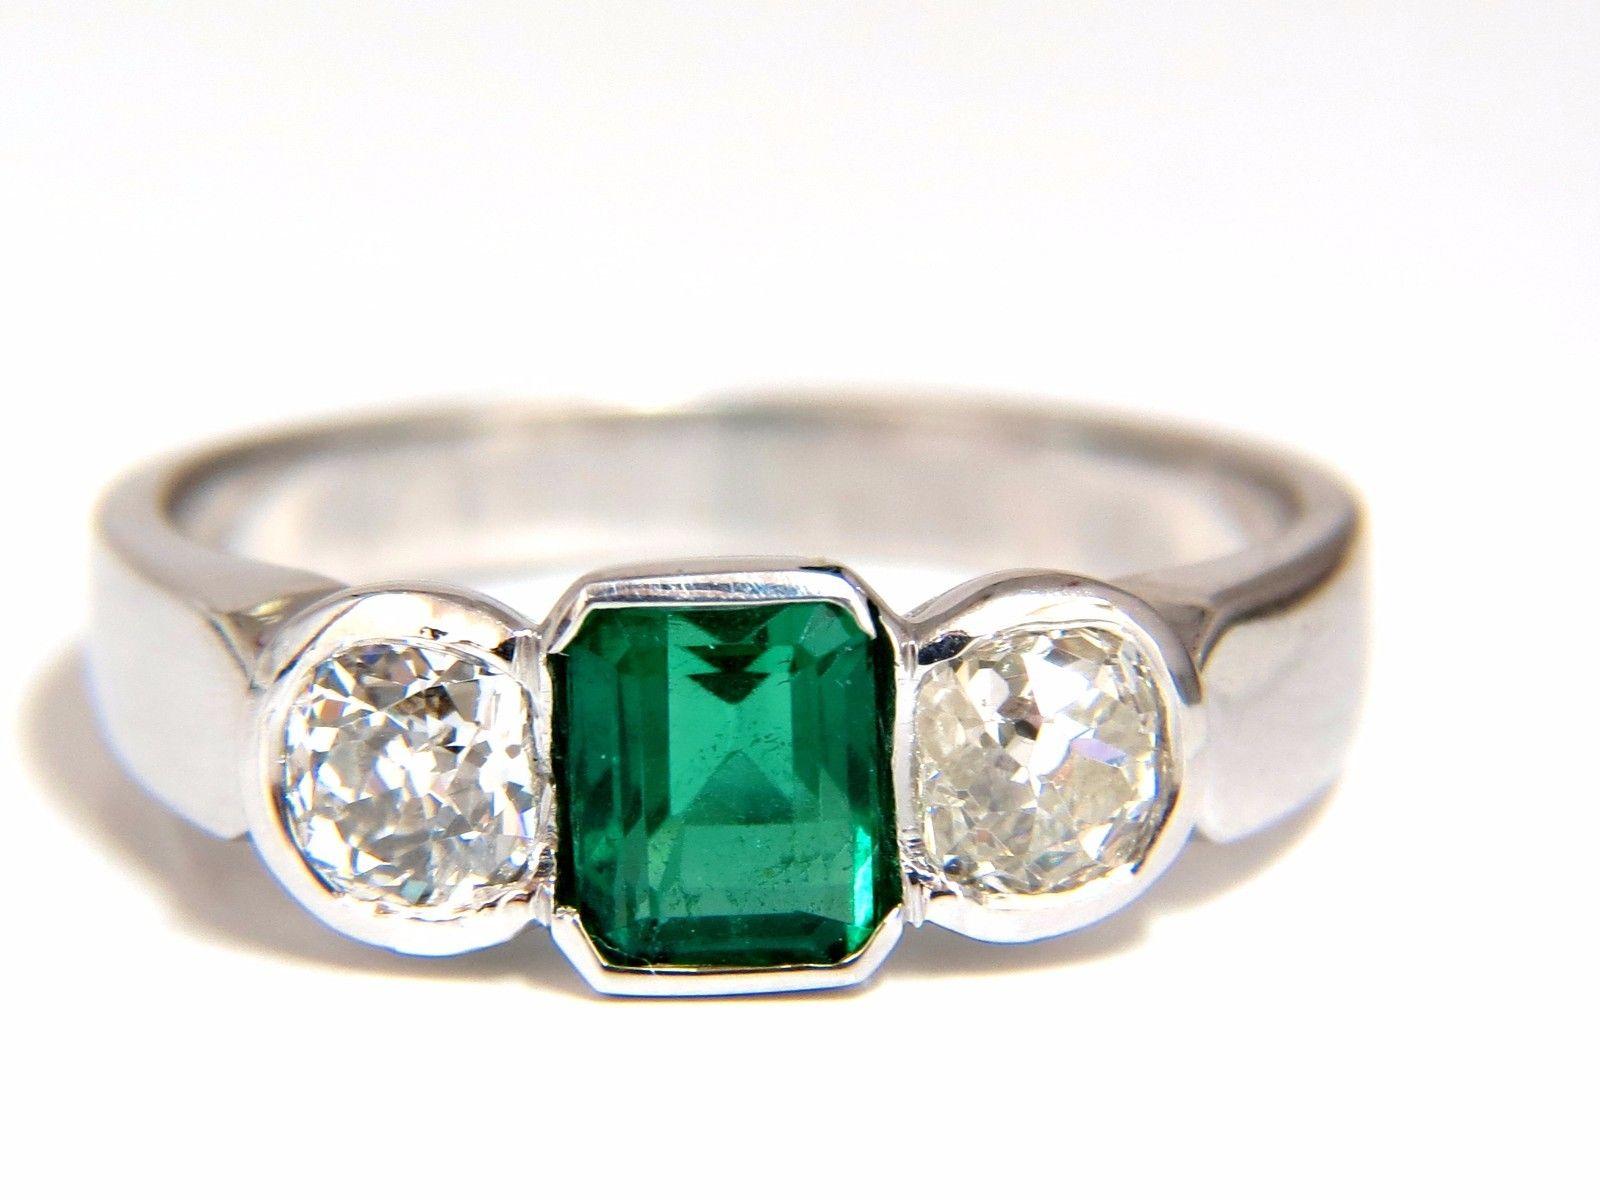 Mod Deco Green.

.88ct. Natural Emerald Ring

5 X 4.50mm

Full cut emerald brilliant 

Transparent & Top Vivid Green 

.77ct. Diamonds.

Round & full cuts 

G-color Vs-2 clarity.  

18kt. white gold

4.2 grams

Ring Current size: 7.5

Depth of ring: